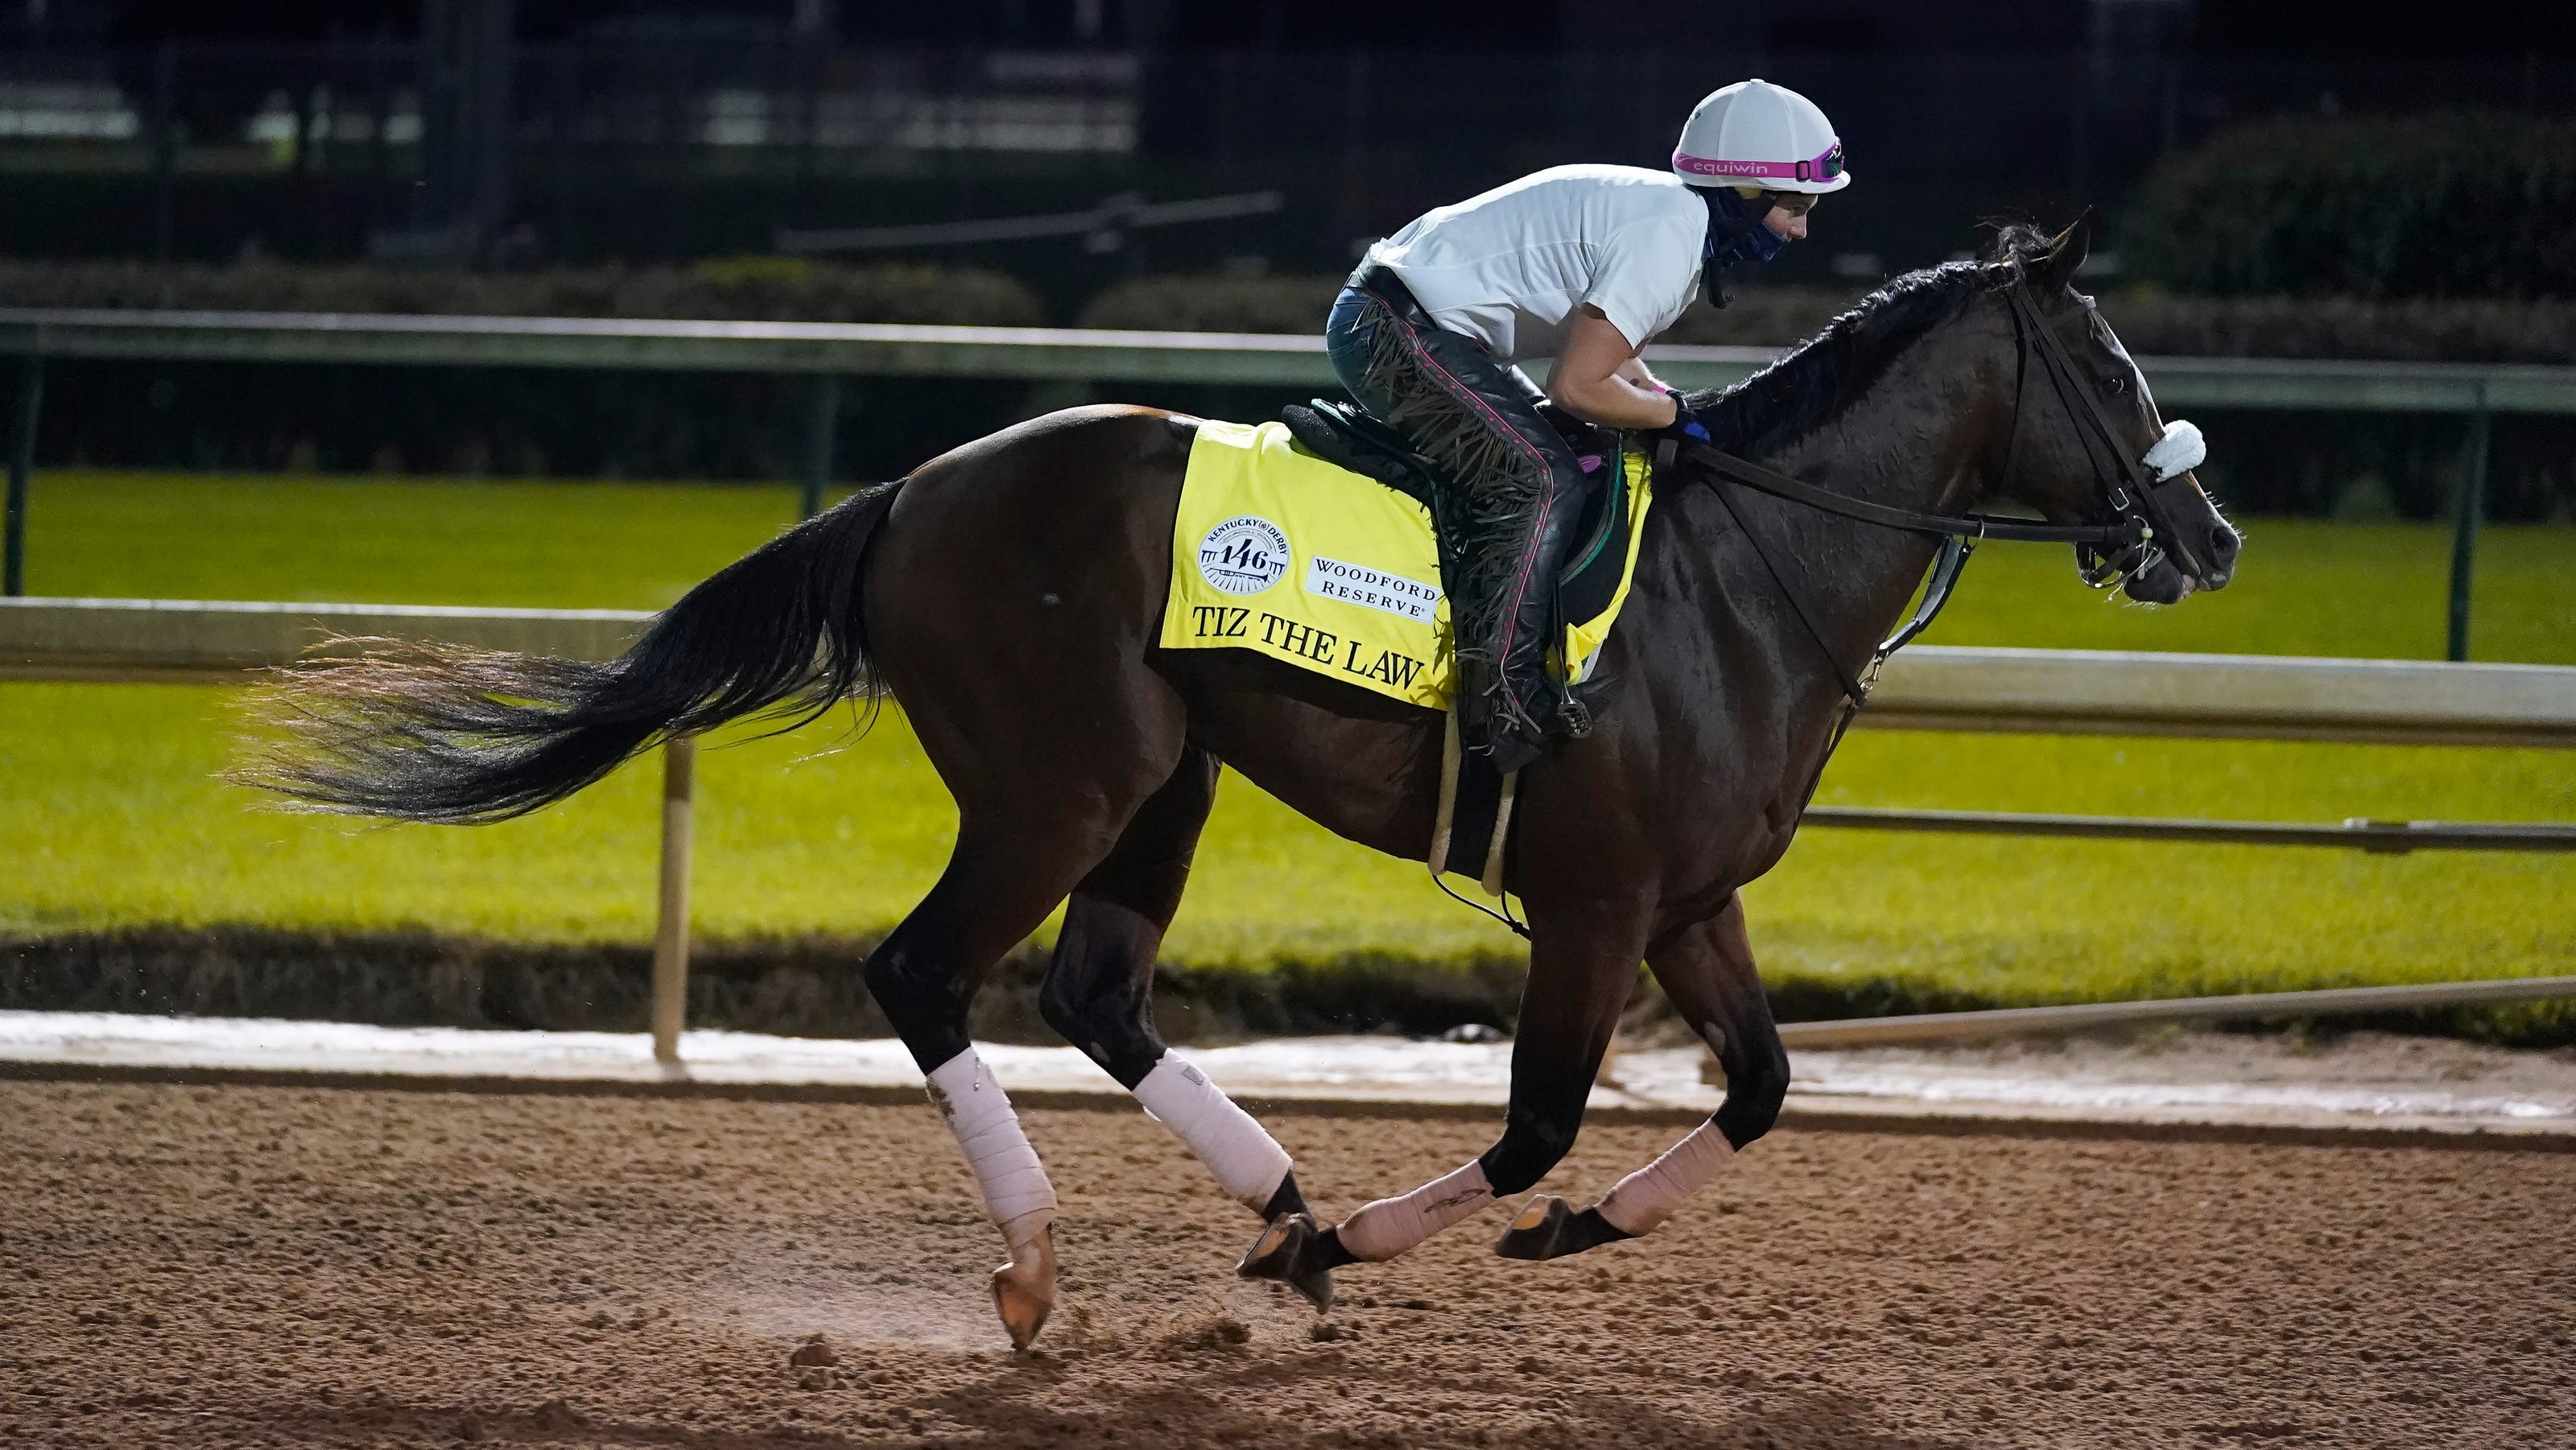 Kentucky Derby 2020: Post time, odds, TV info and the full Derby field